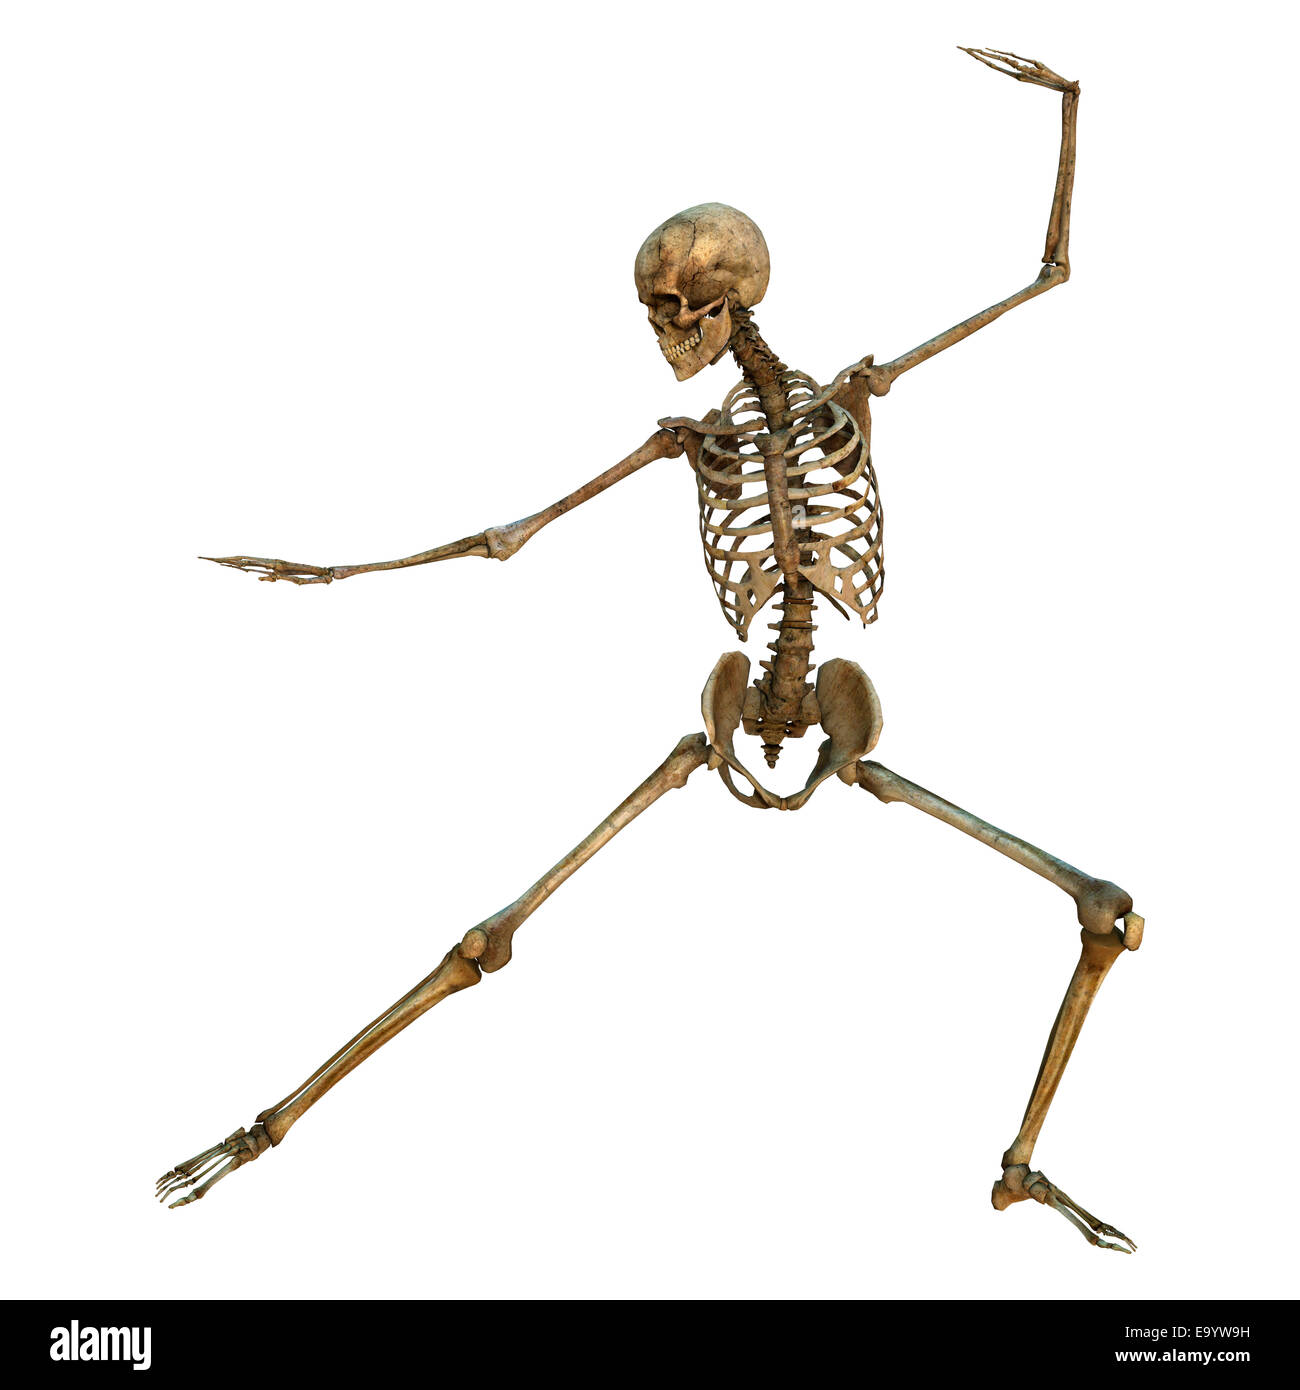 3d-digital-render-of-a-human-skeleton-in-a-bow-and-arrow-martial-arts-E9YW9H.jpg